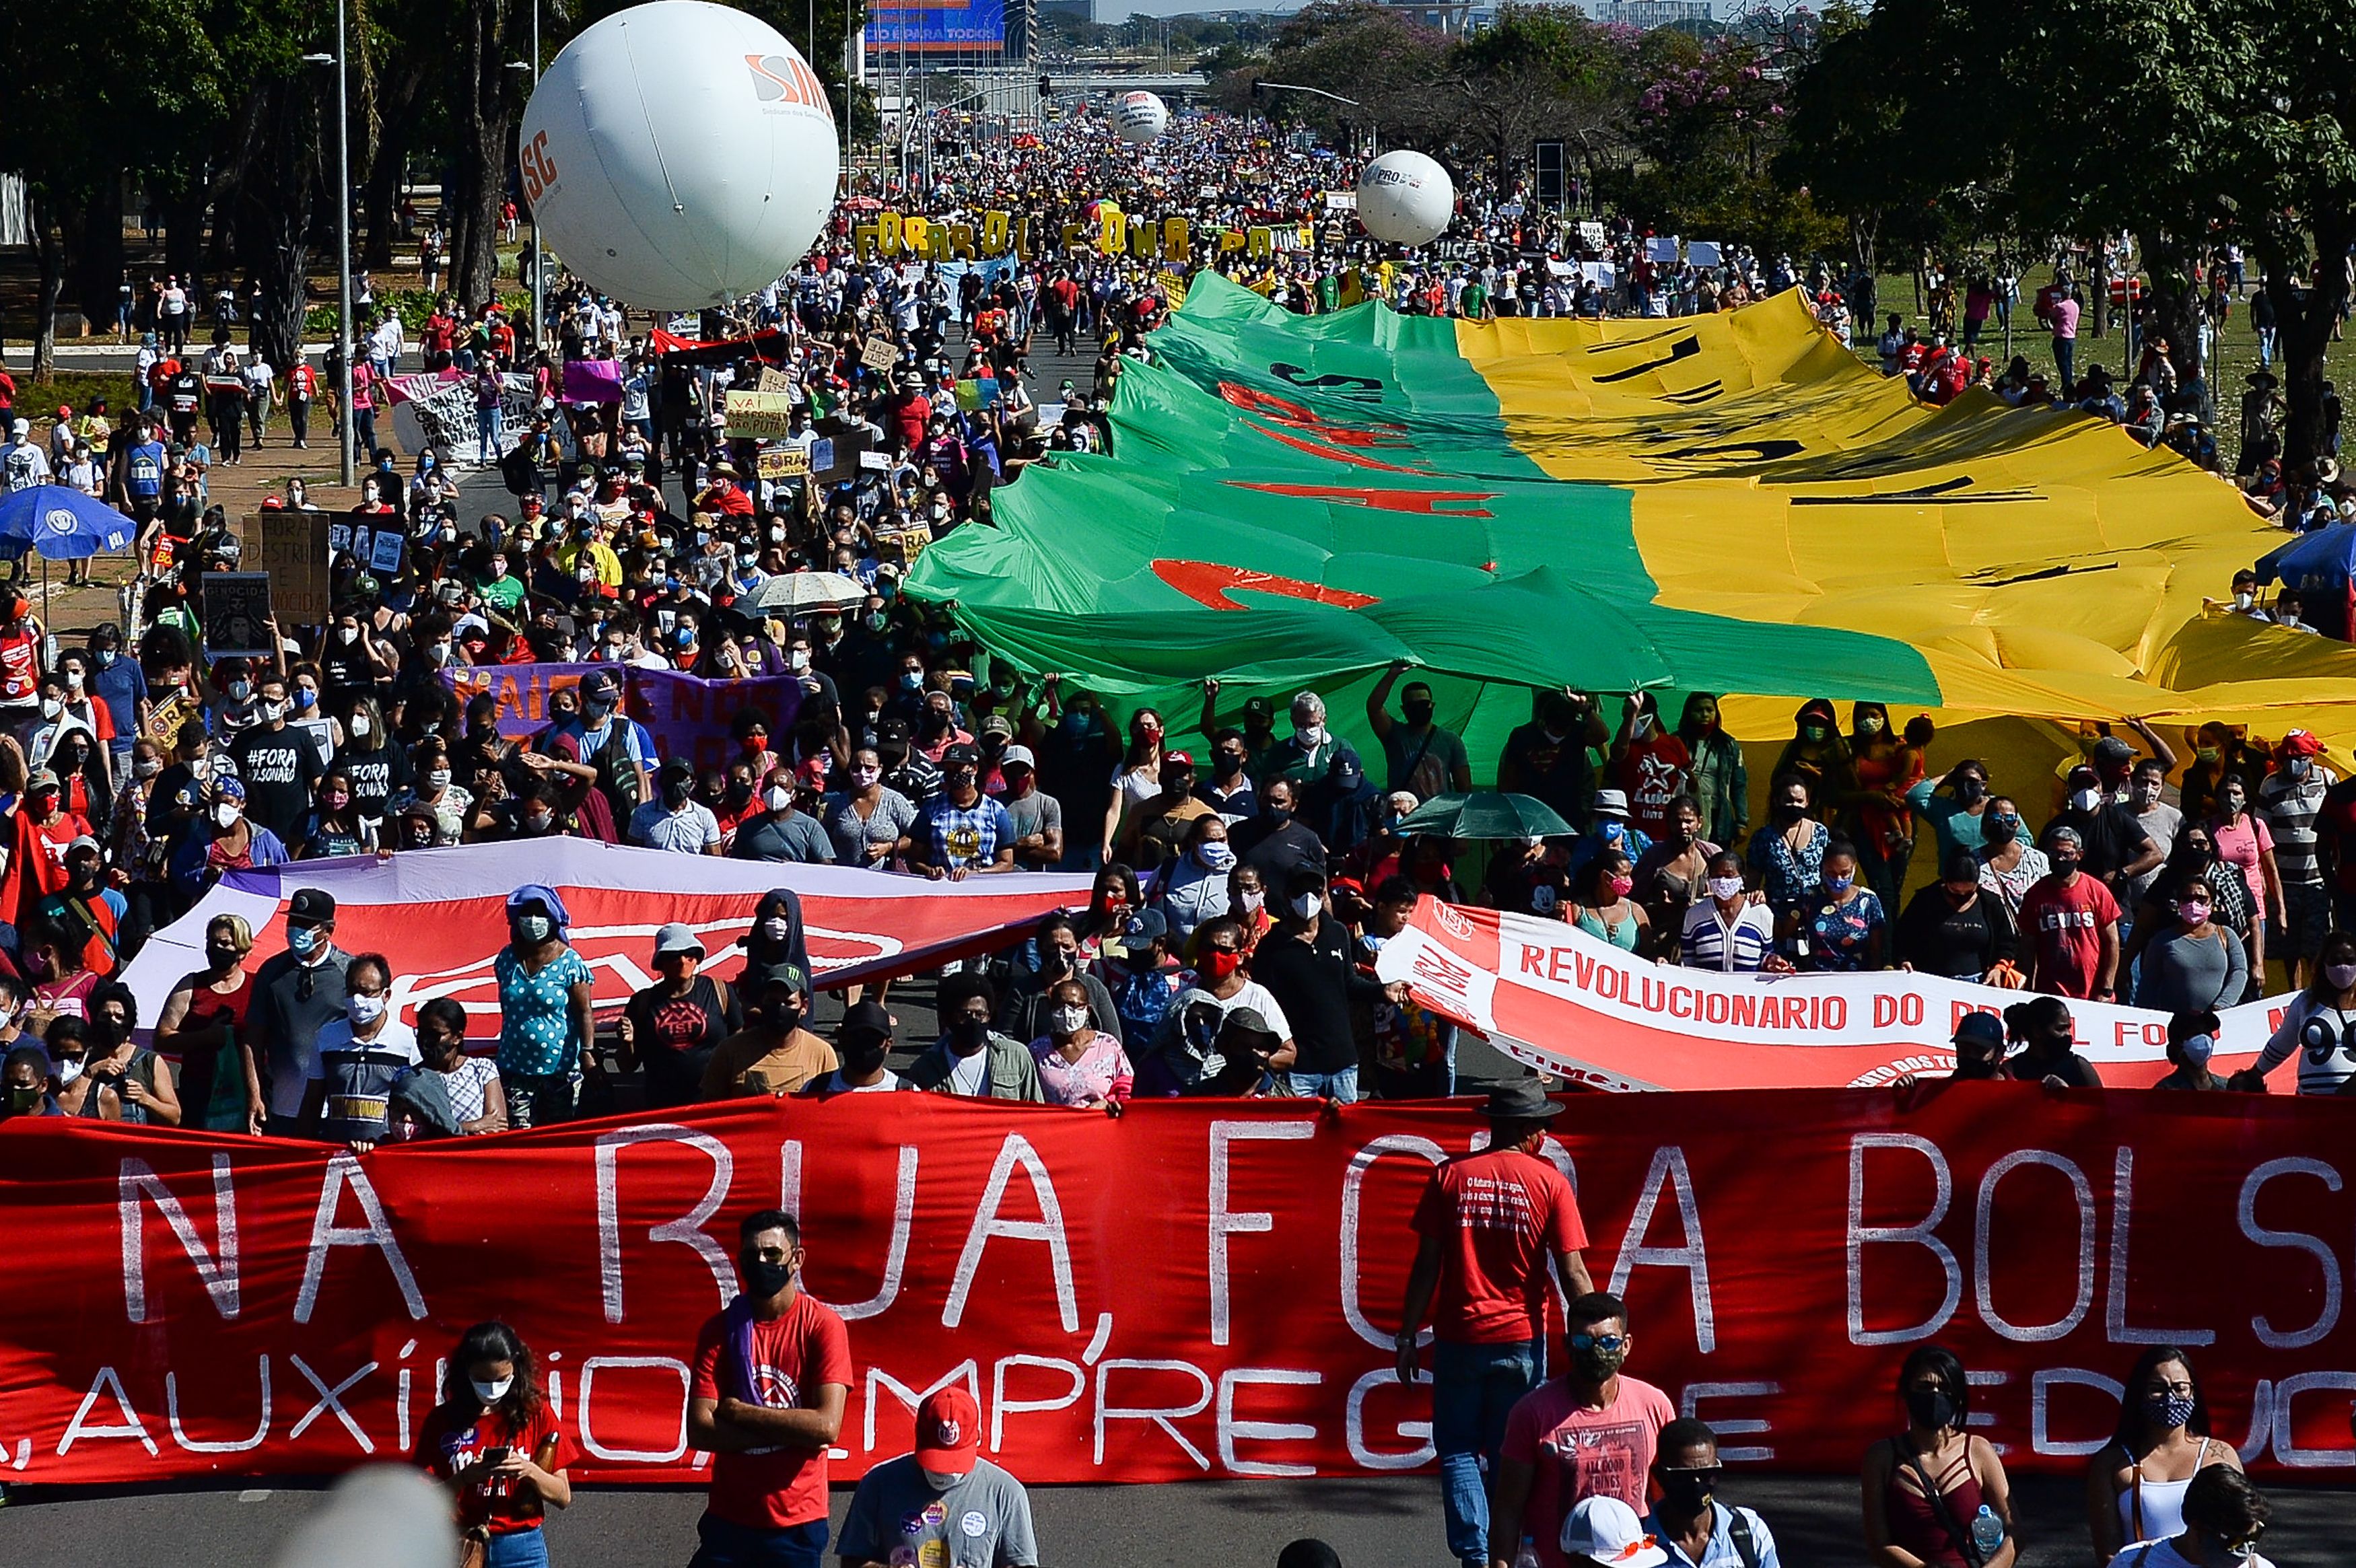  Demonstrators gather holding large flags during a protest against Bolsonaro's administration on June 19, 2021 in Brasilia, Brazil